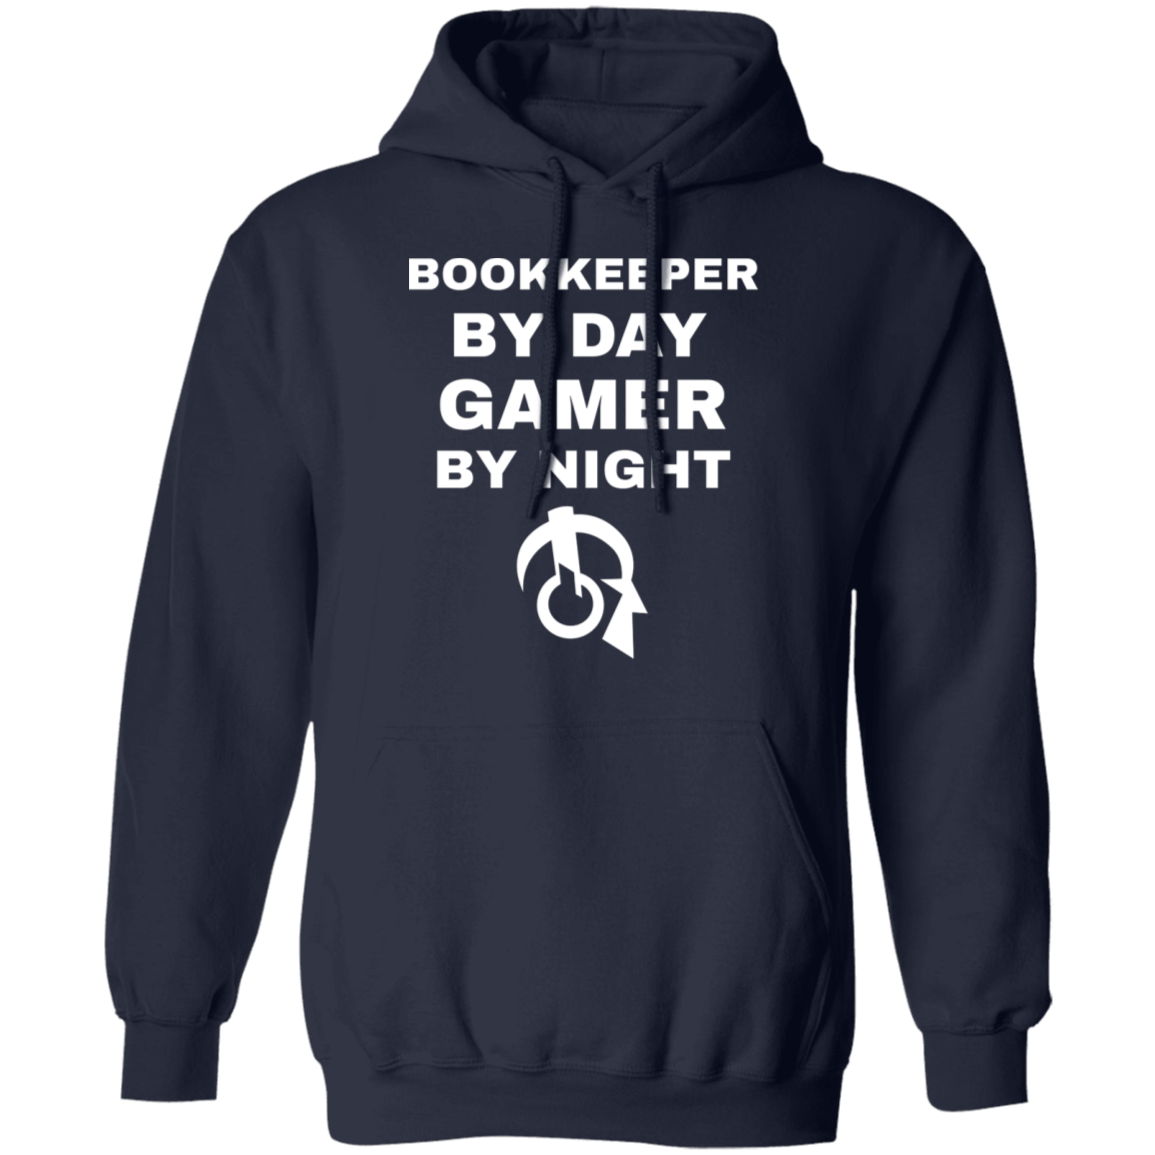 Bookkeeper By Day Gamer By Night Hoodie